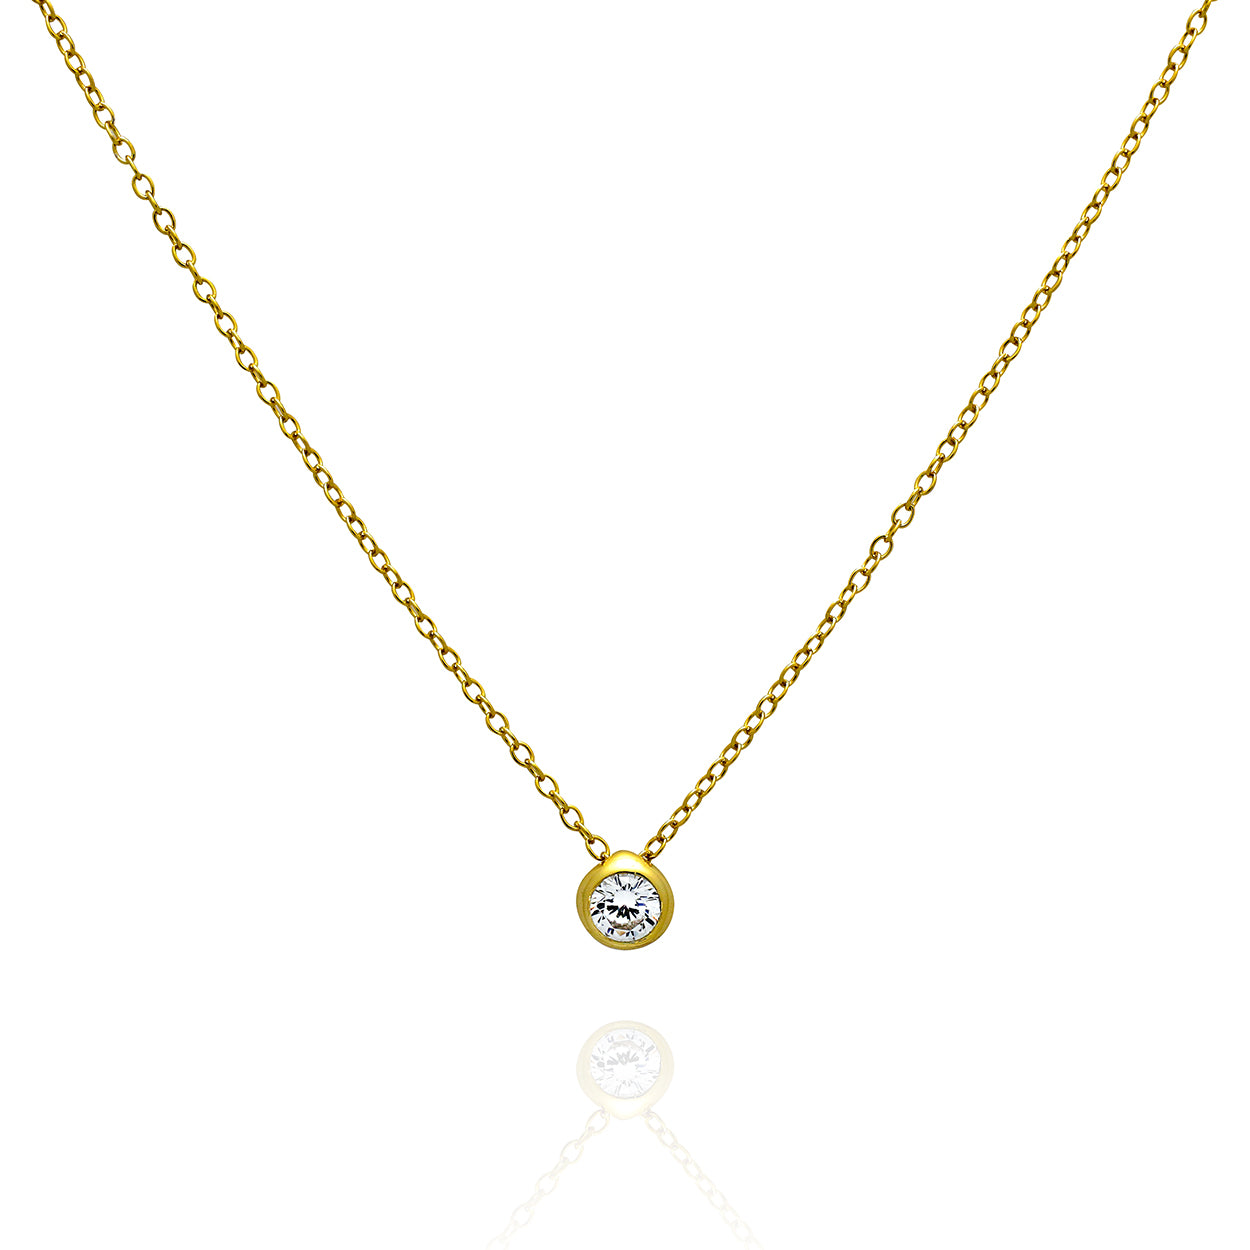 Sterling Silver Bezel Set Cubic Zirconia Necklace plated in 18KT Yellow Gold